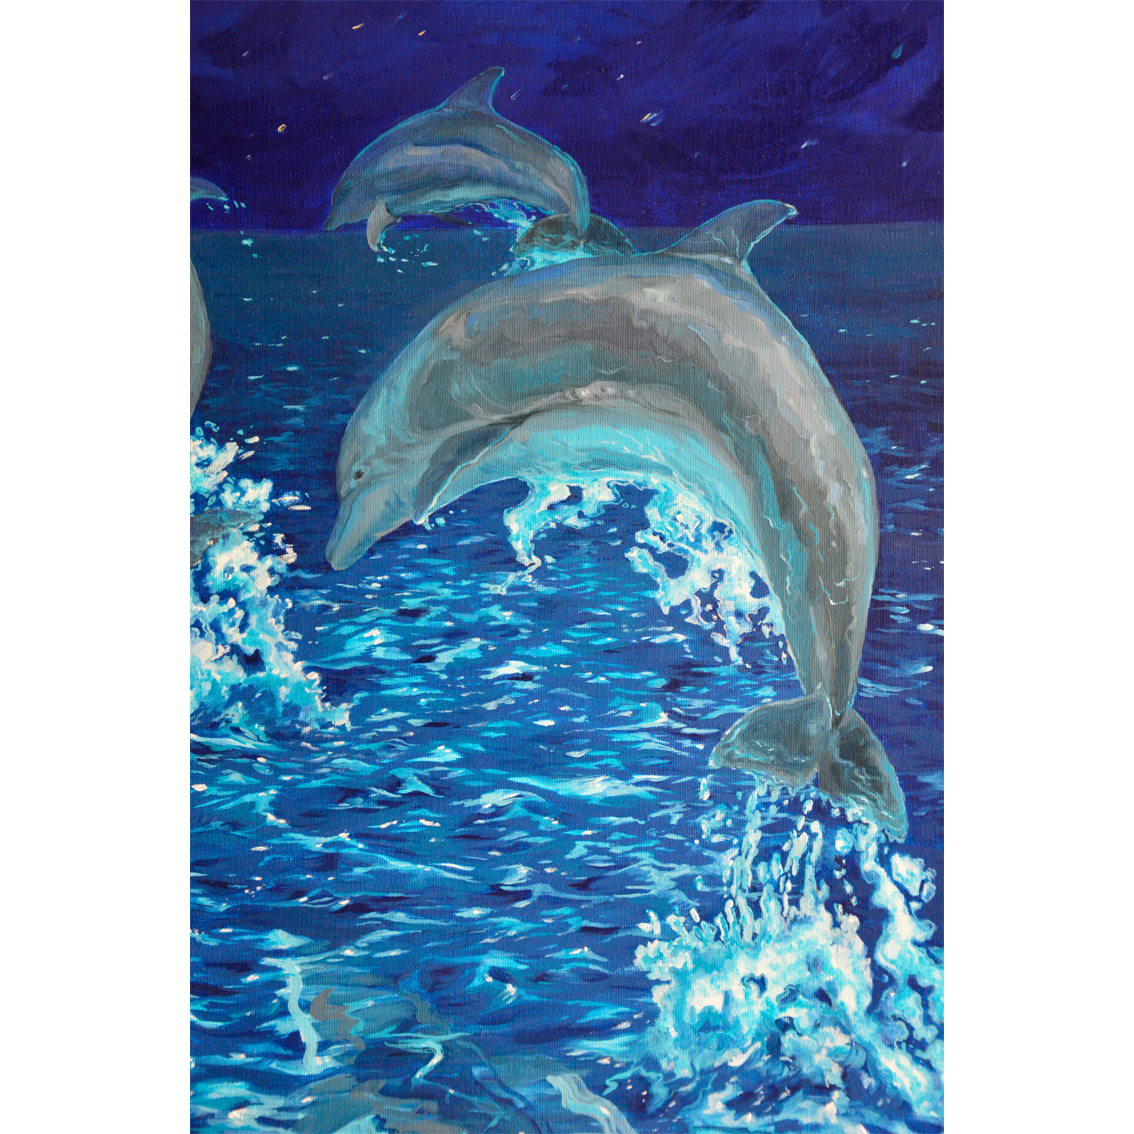 Jumping dolphin in bioluminescent water